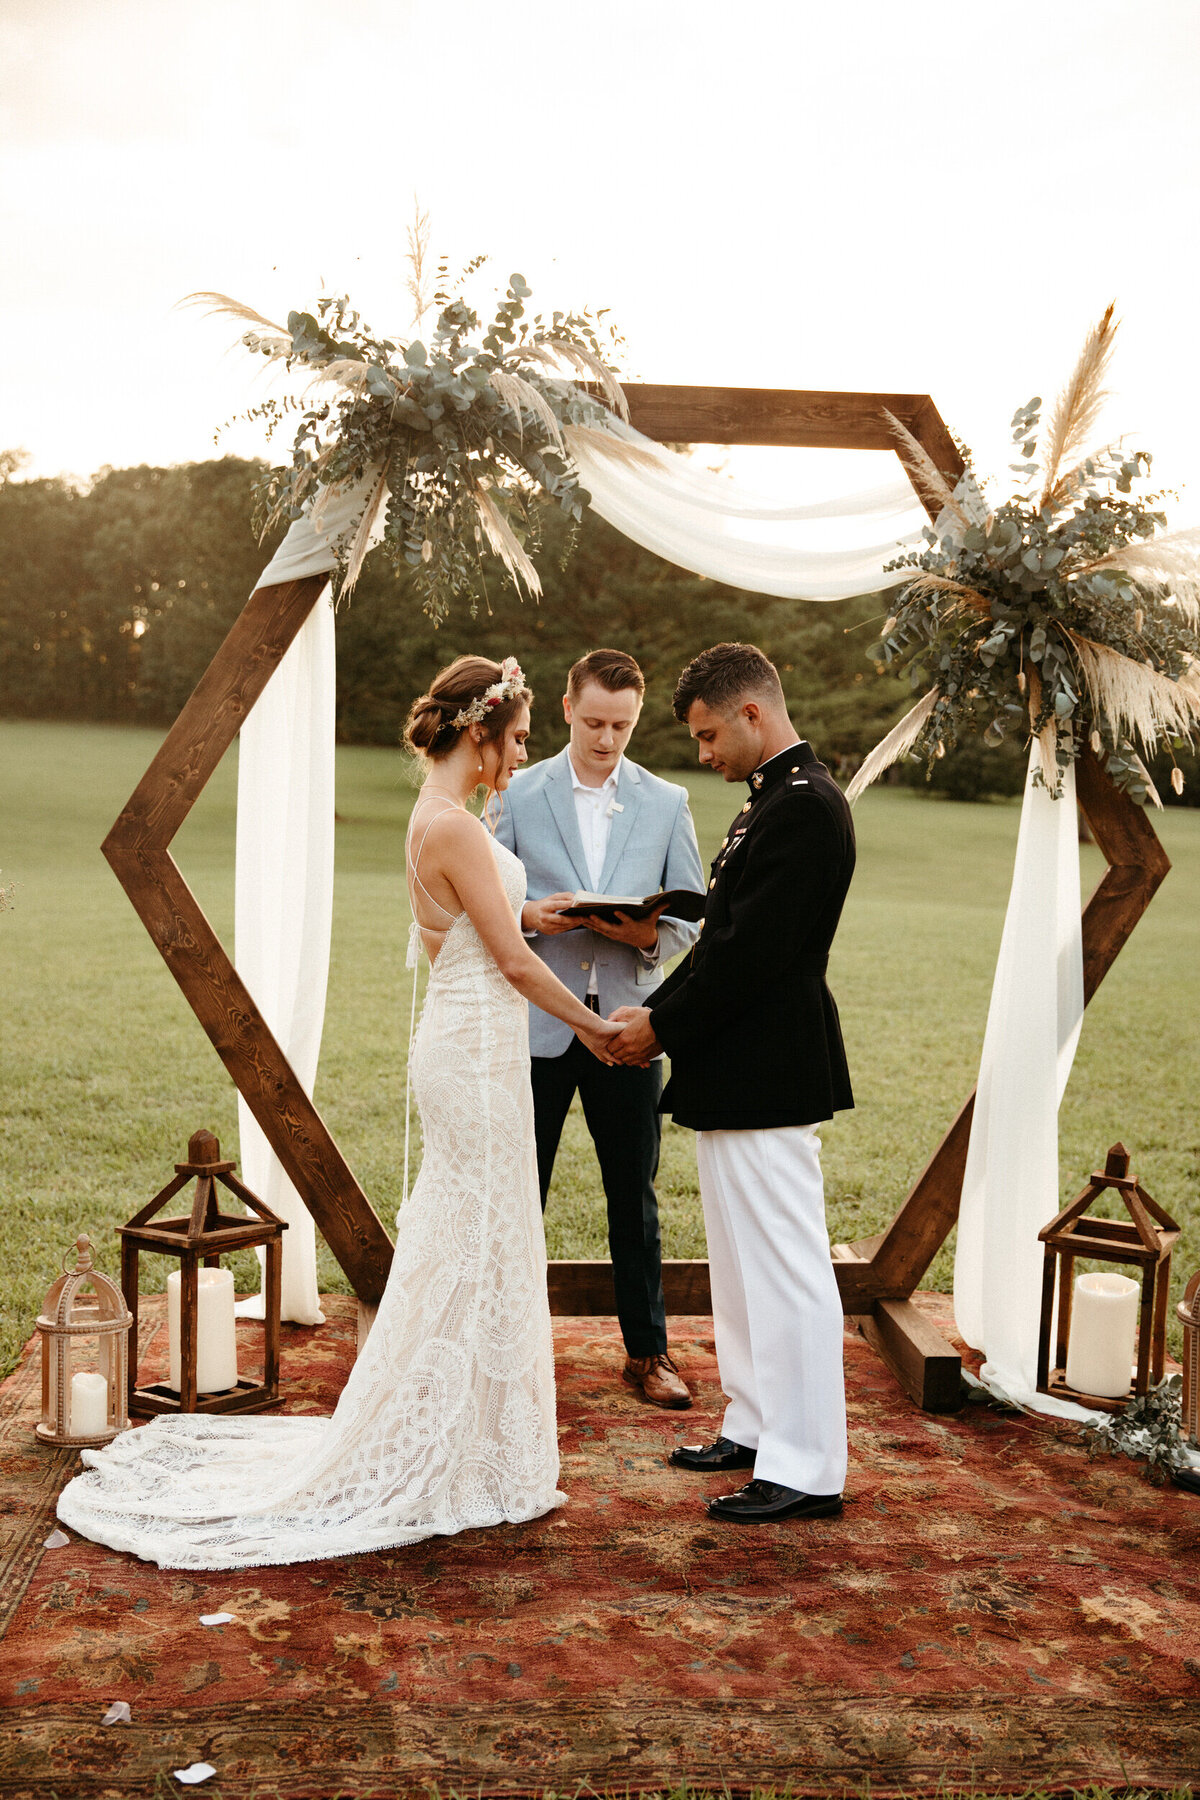 Boho wedding ceremony with hexagon arch, vintage rug, and candles inside lanterns